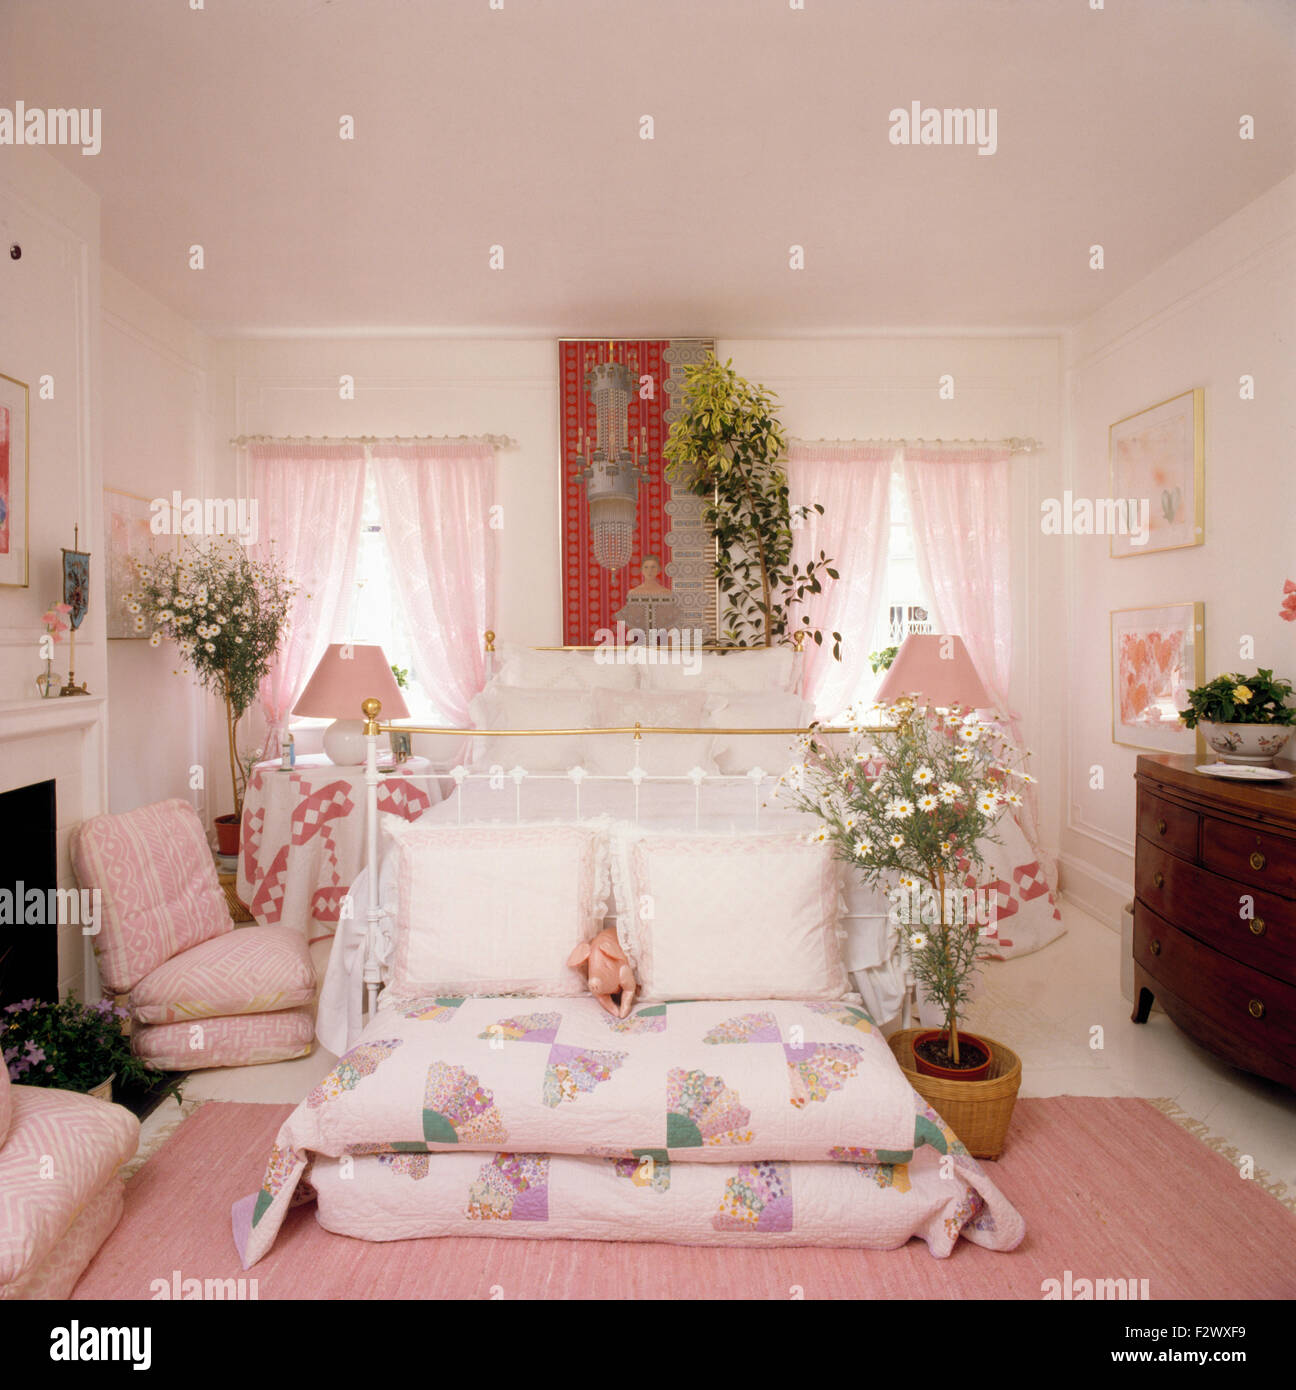 Patchwork cushions below white brass bed in nineties bedroom with pink drapes on the windows Stock Photo